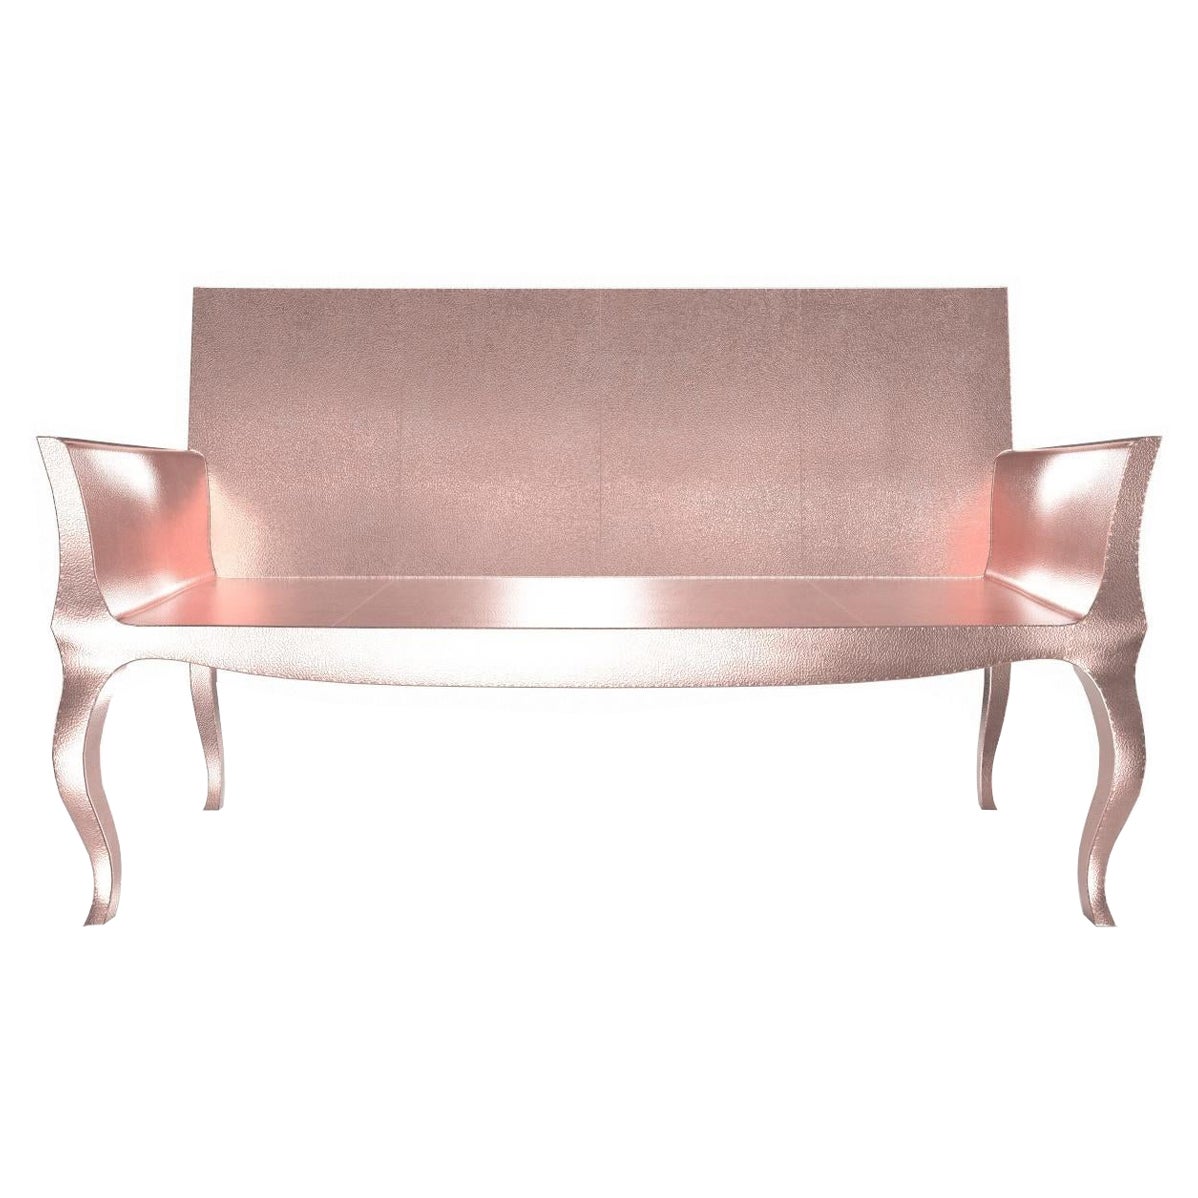 Louise Settee Art Deco Canapes in Fine Hammered Copper by Paul Mathieu For Sale